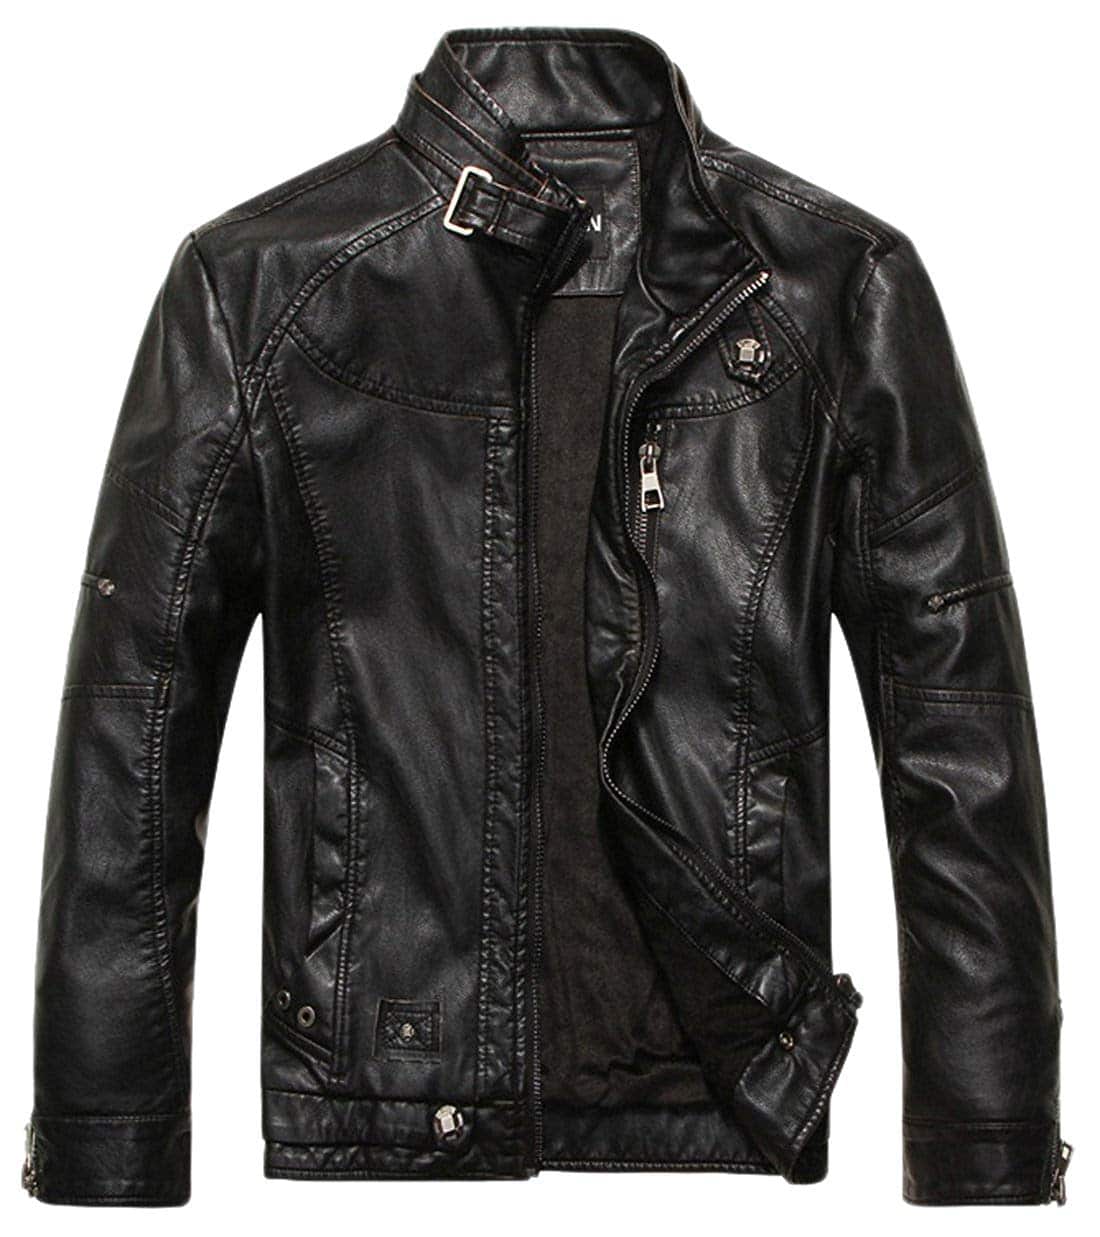 Top 10 Best Leather Jacket for Men in 2023 Complete Reviews